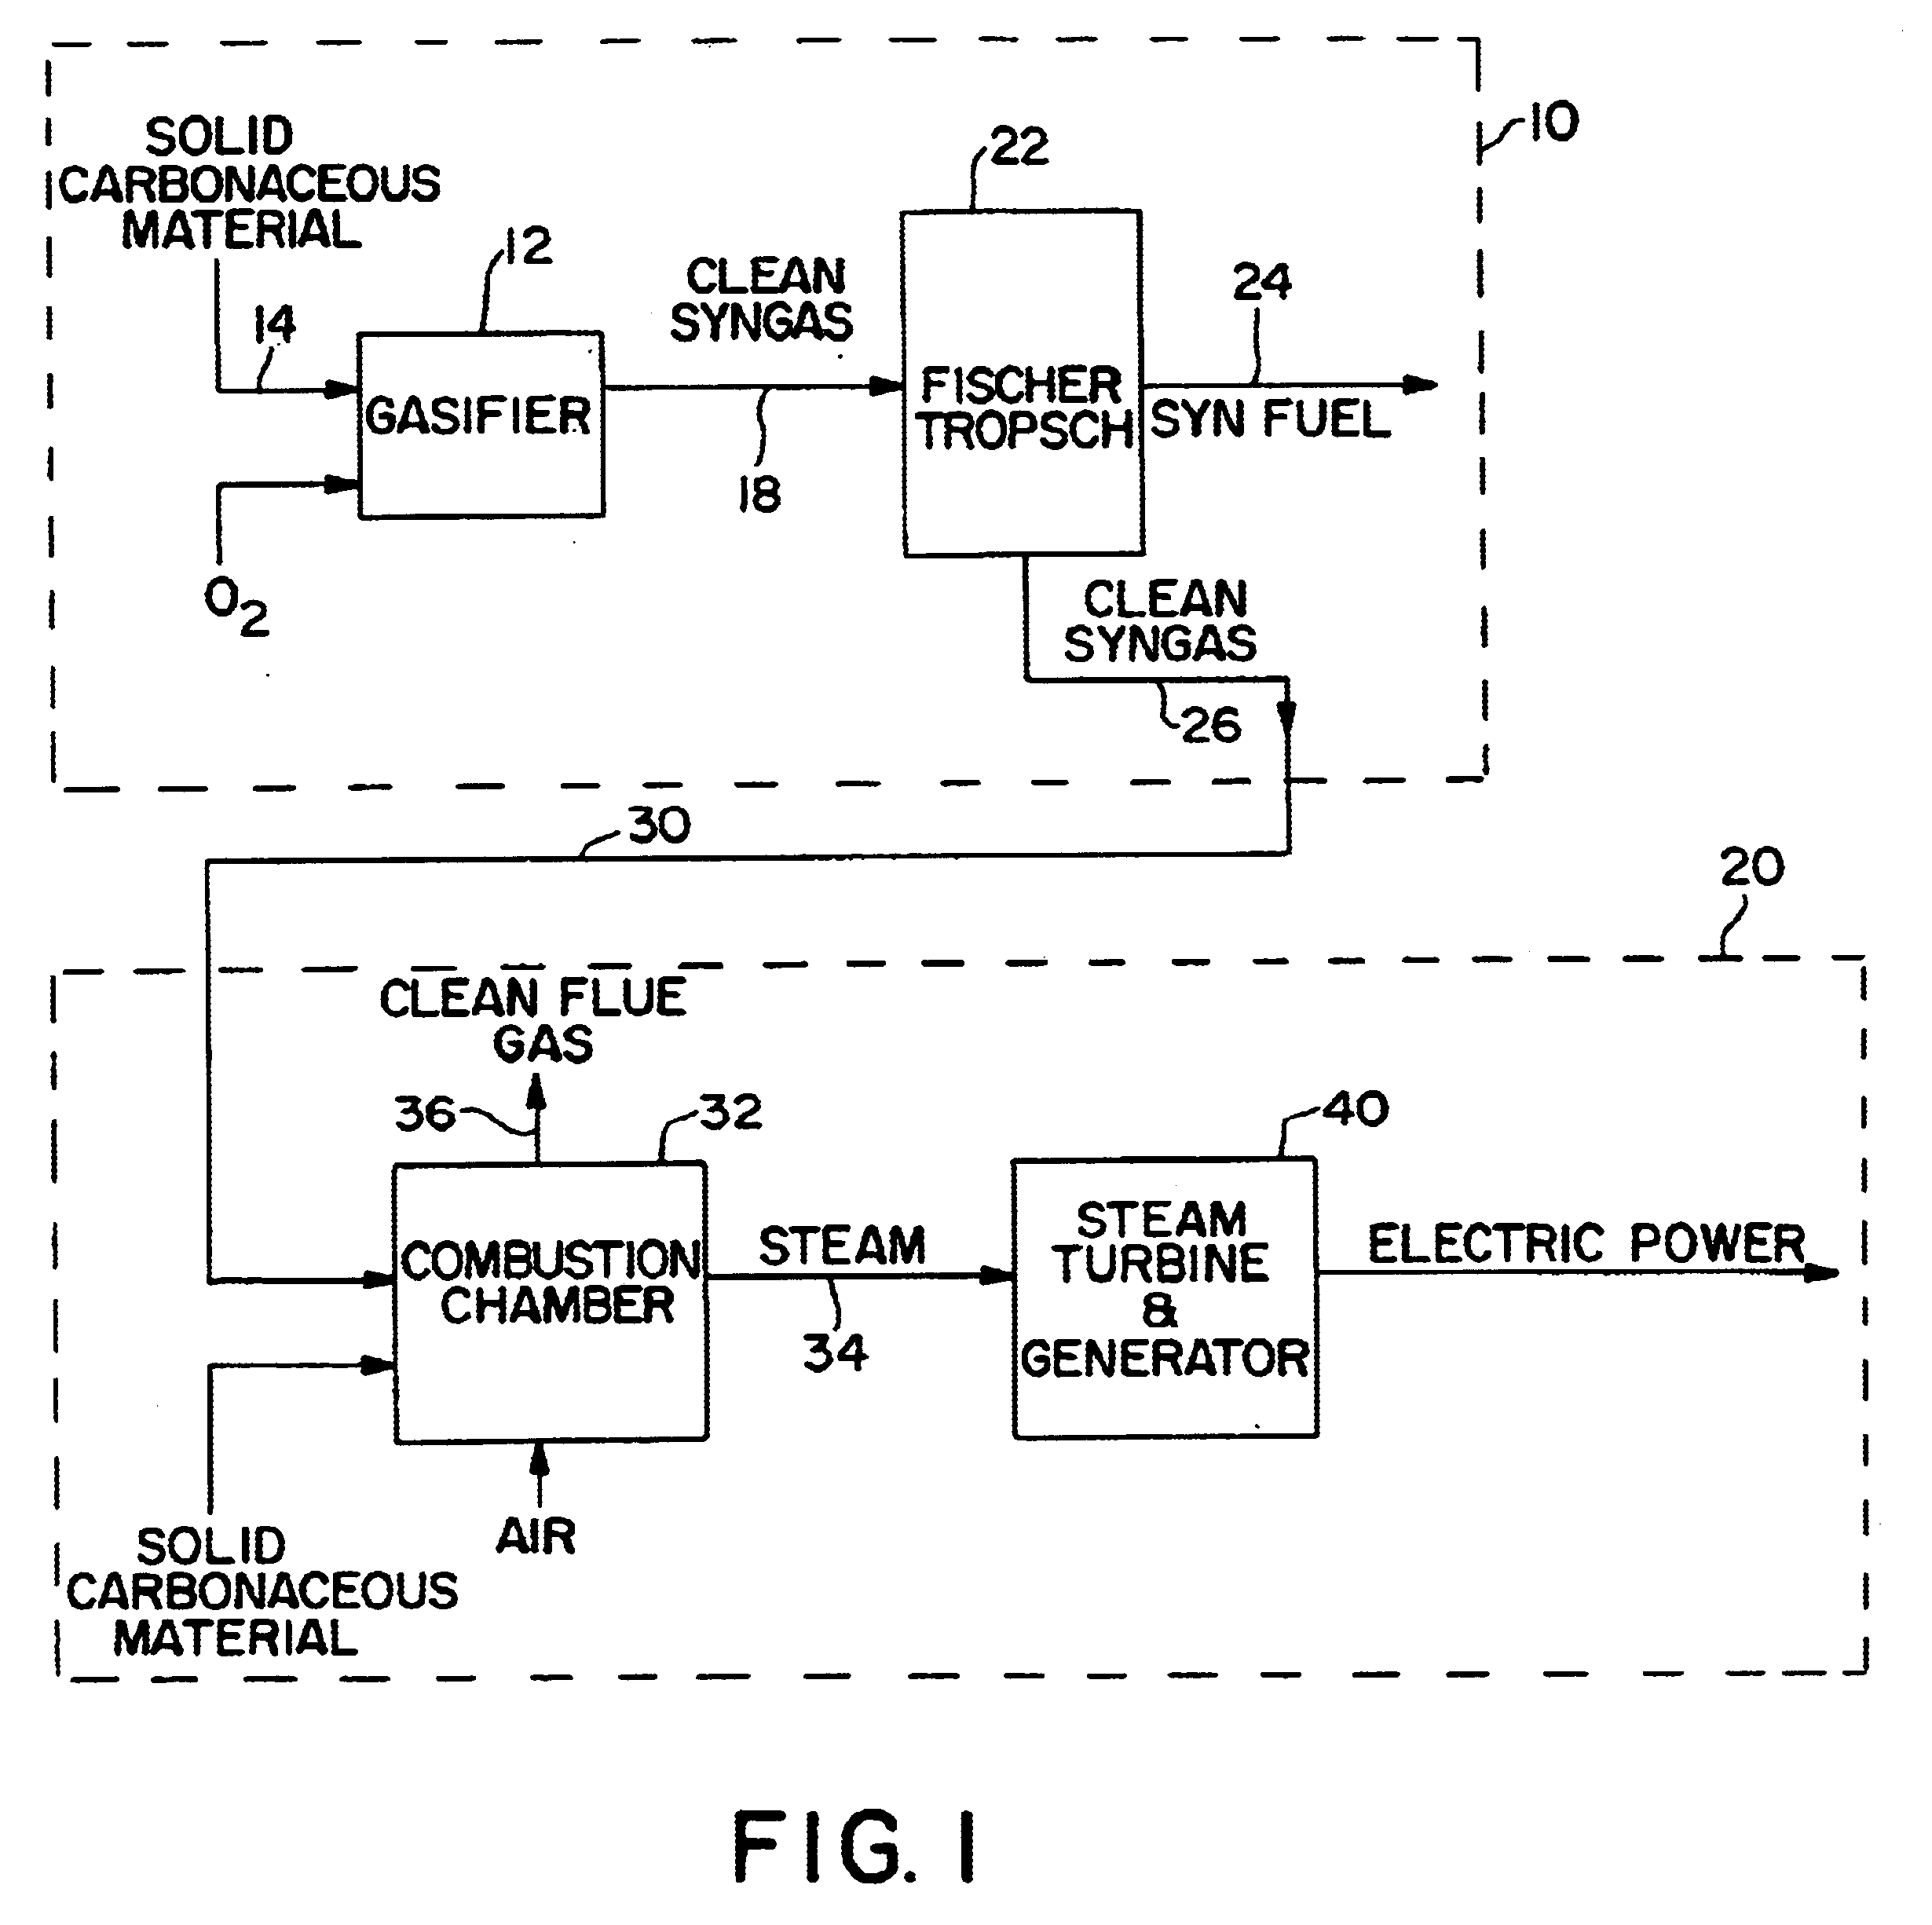 Integrated electric power and synthetic fuel plant